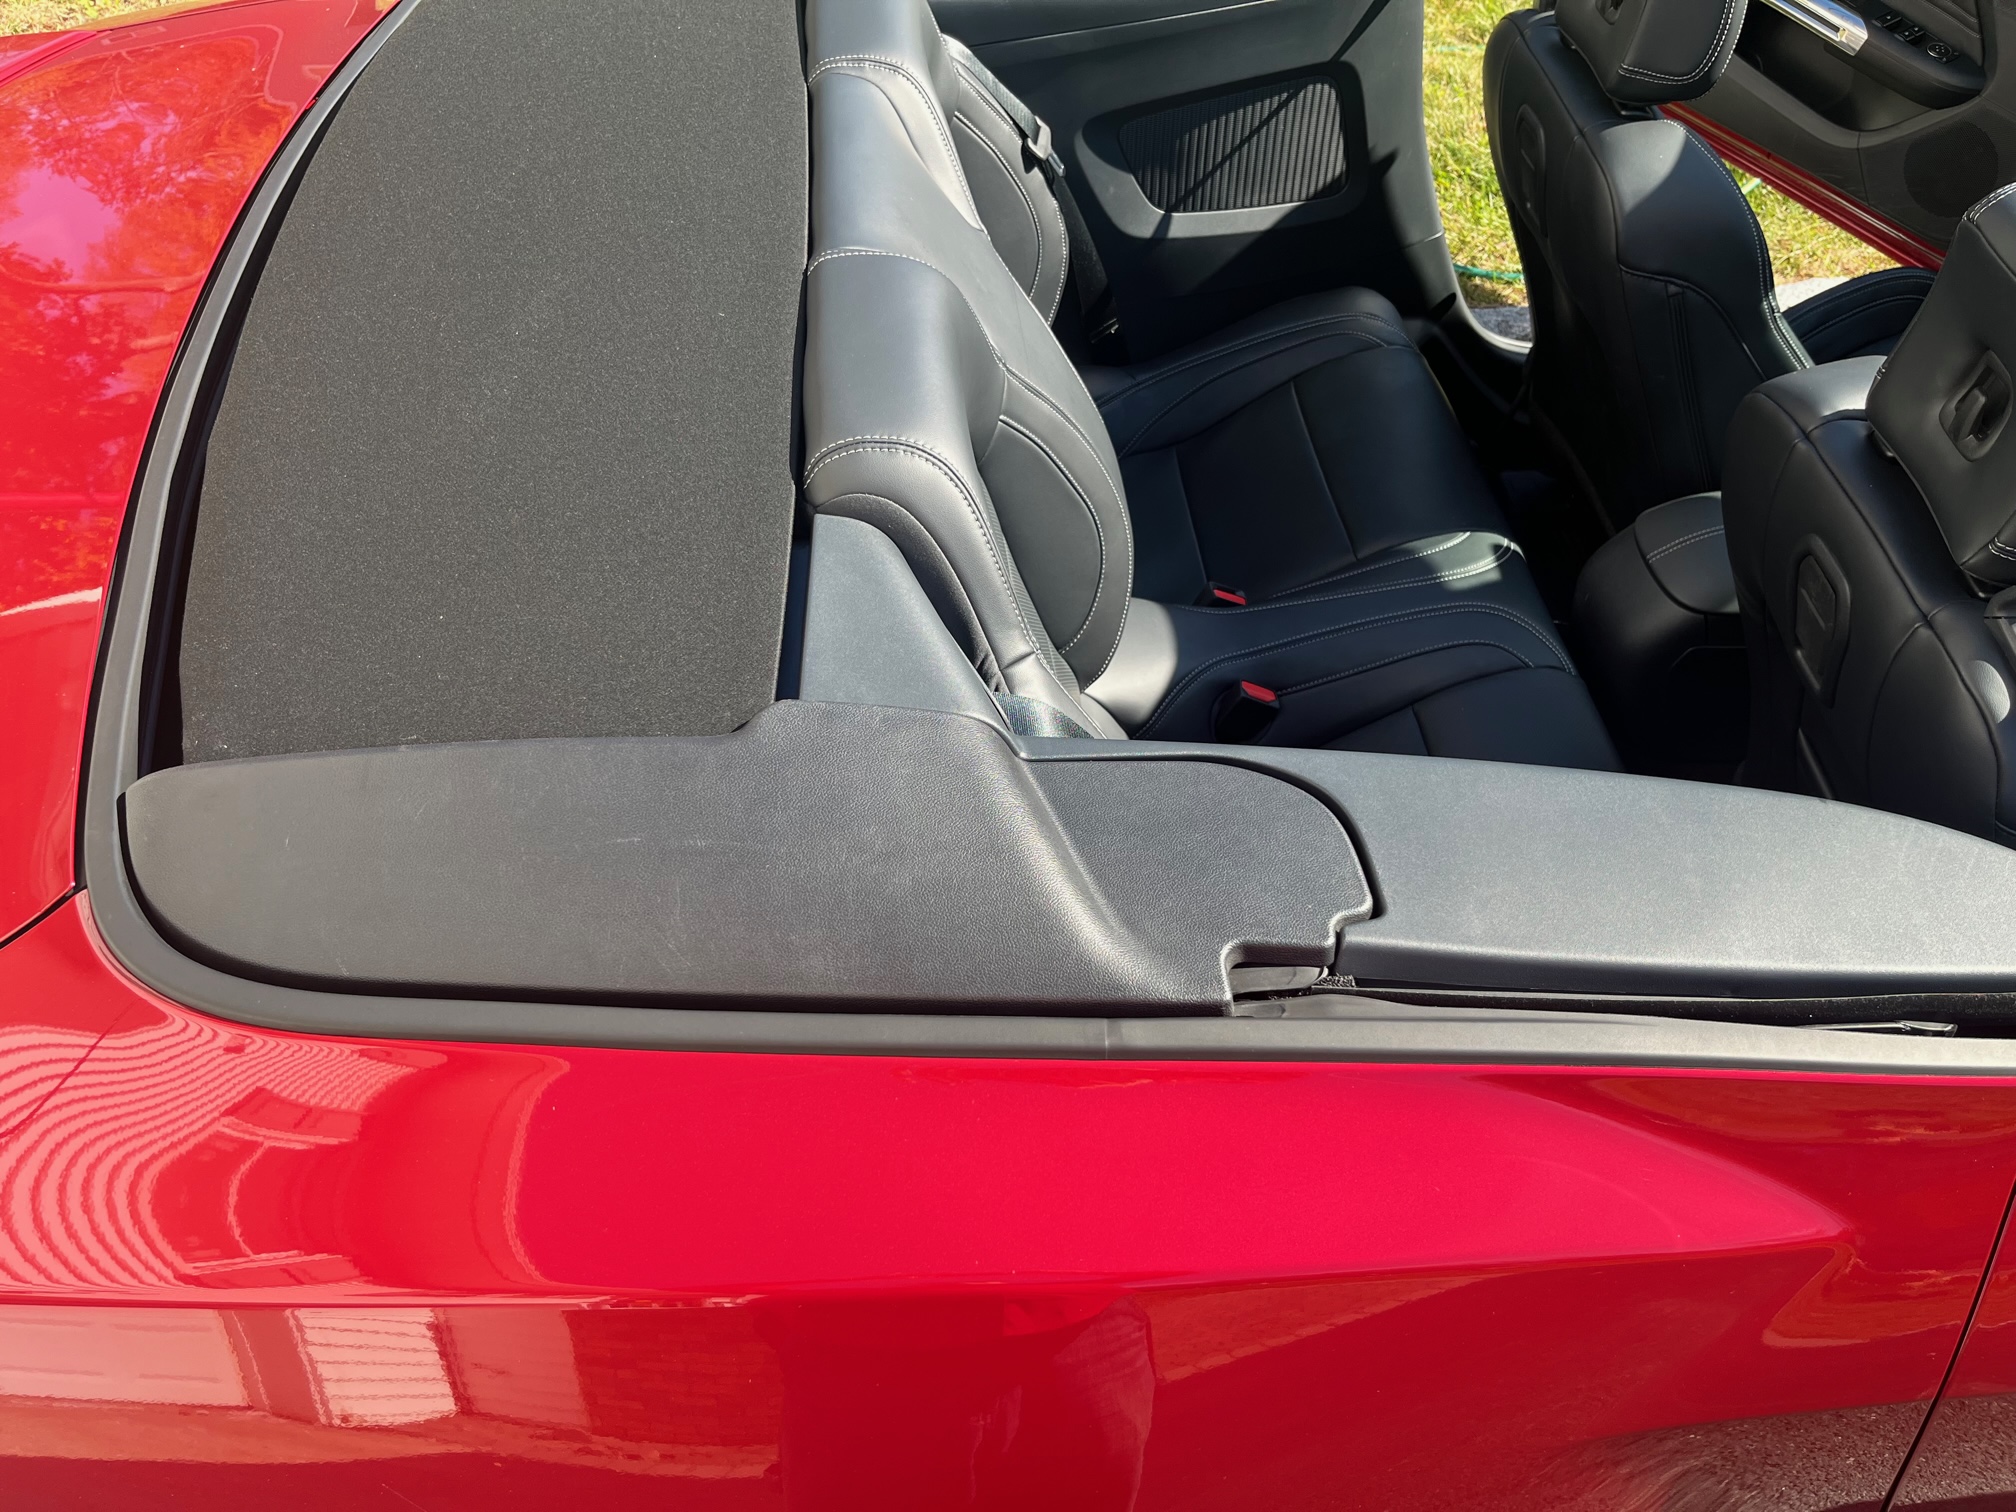 S650 Mustang Convertible Boot Side Plastic Cover Panels IMG_9346